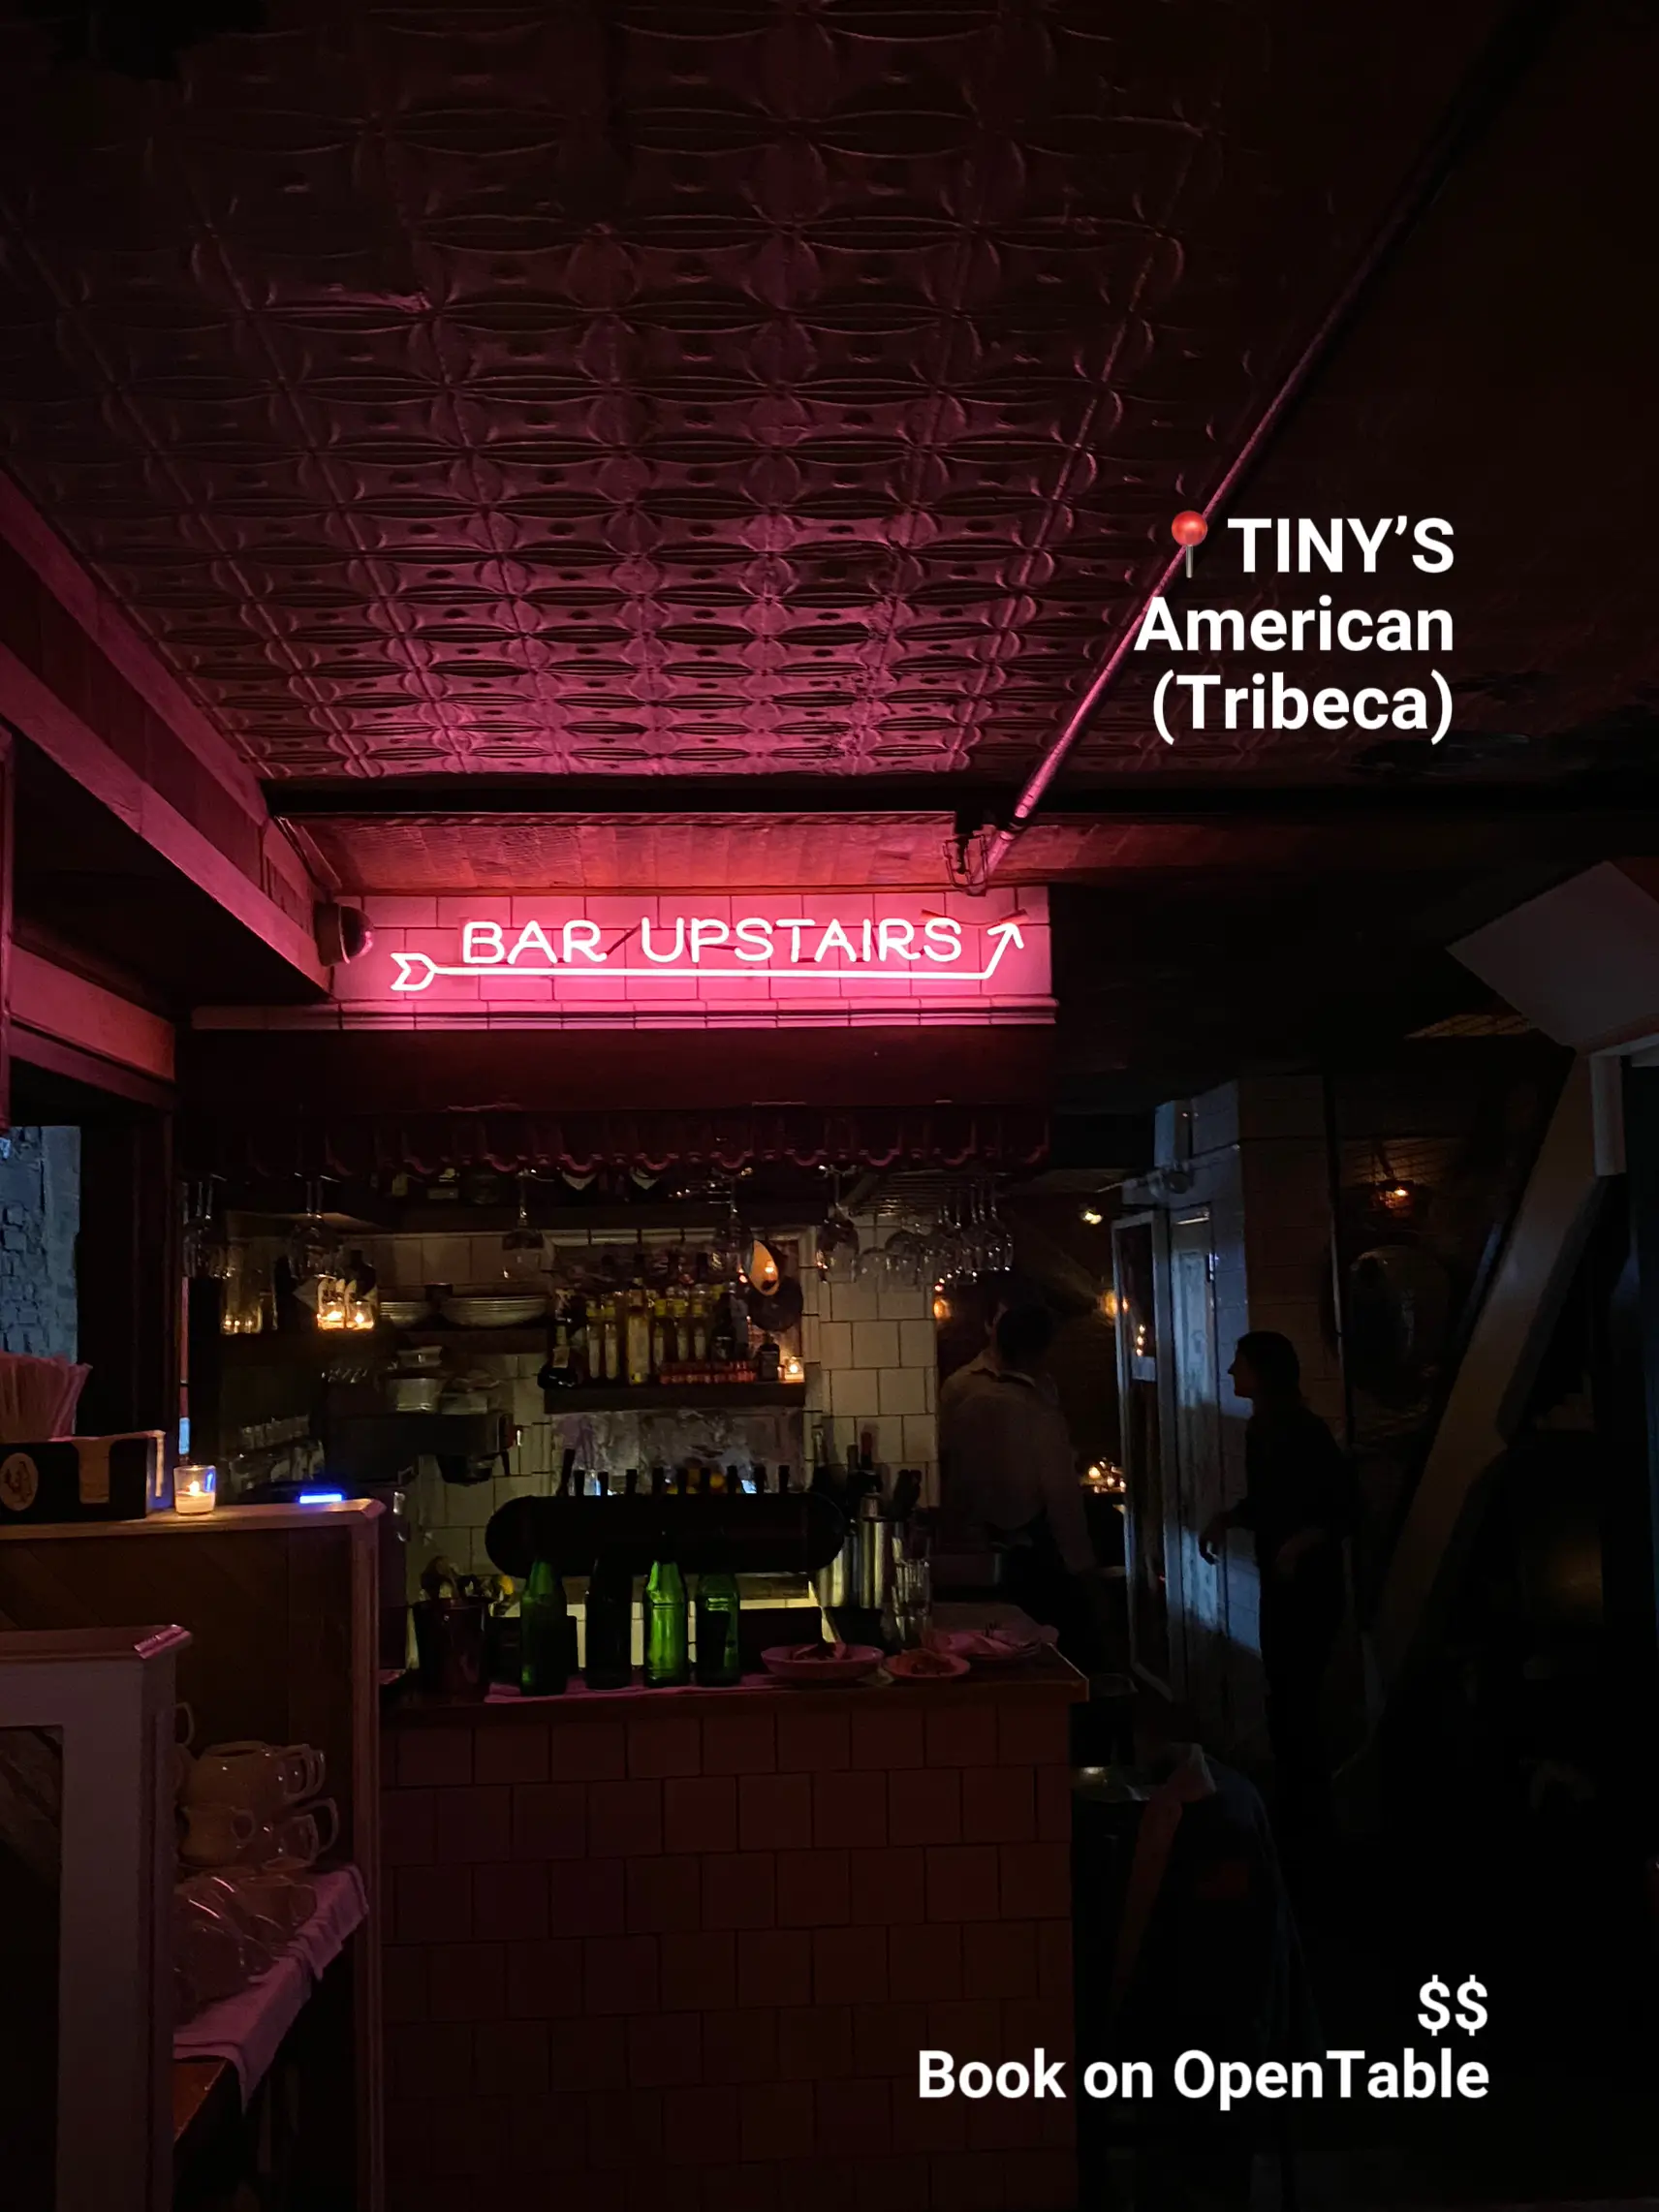  A bar with a neon sign that says "Bar Upstairs".